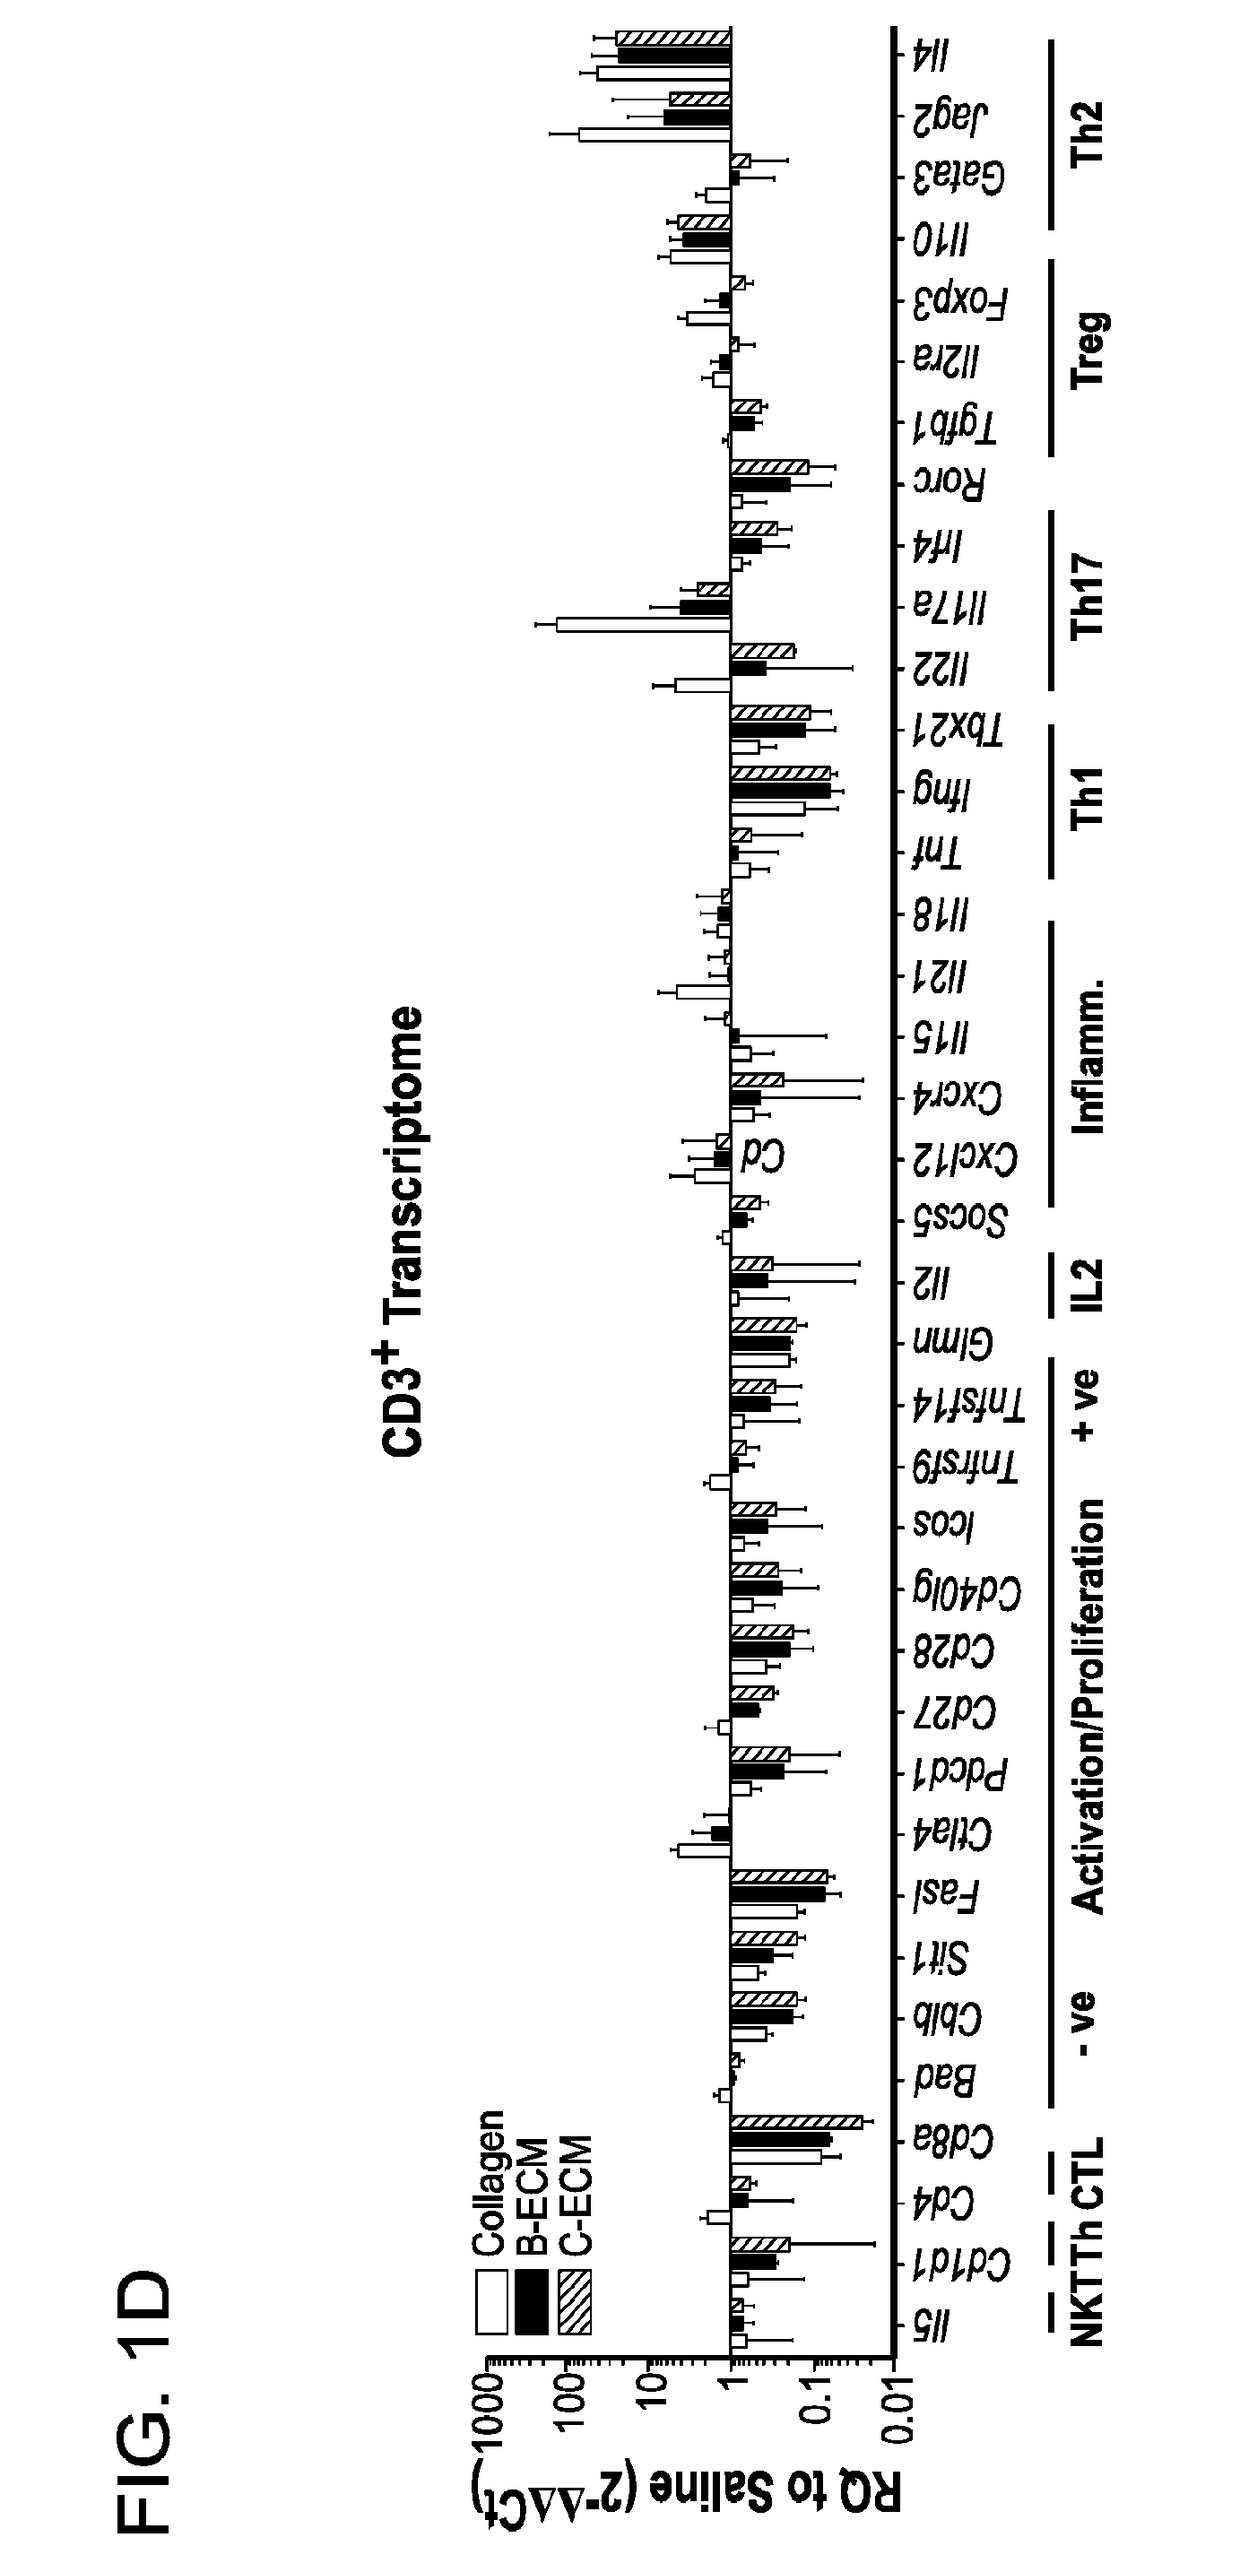 Compositions and methods for modulating wound healing and regeneration